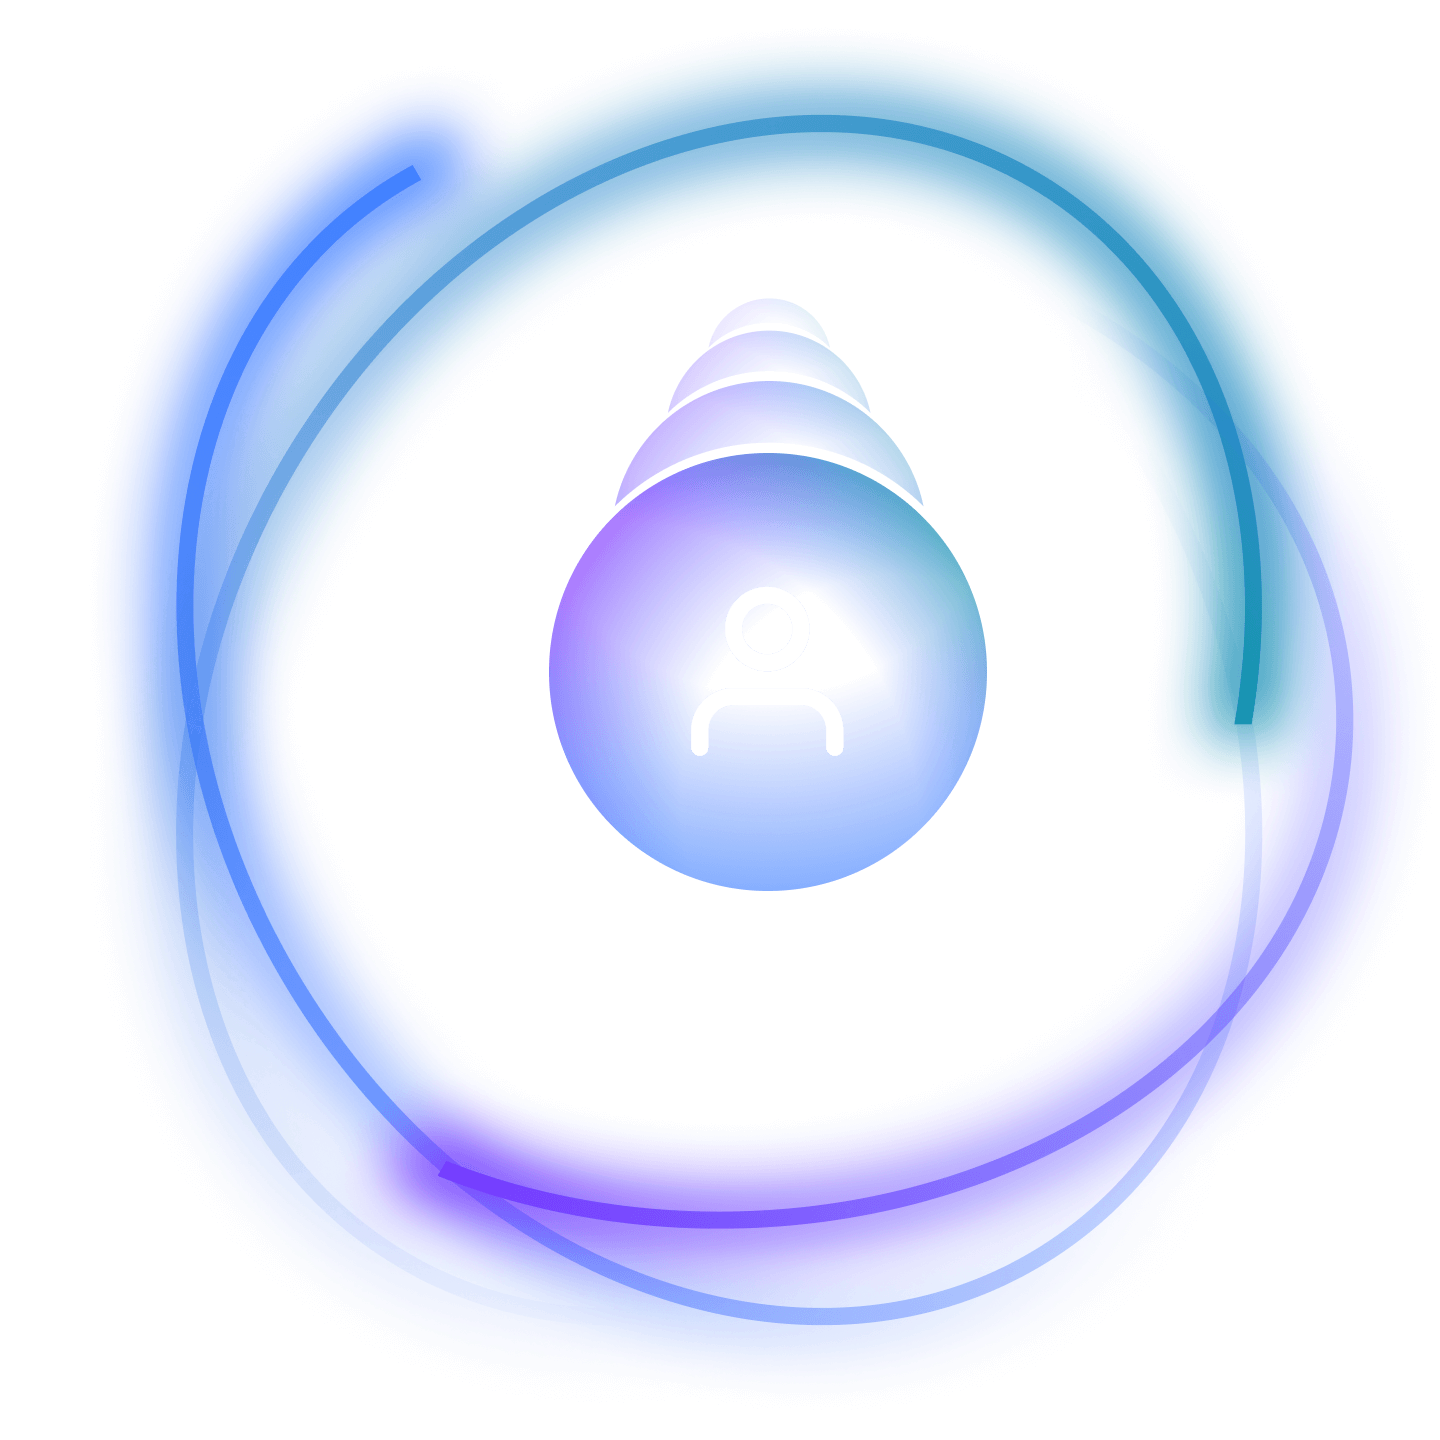 Orbital circles flowing around a fan icon